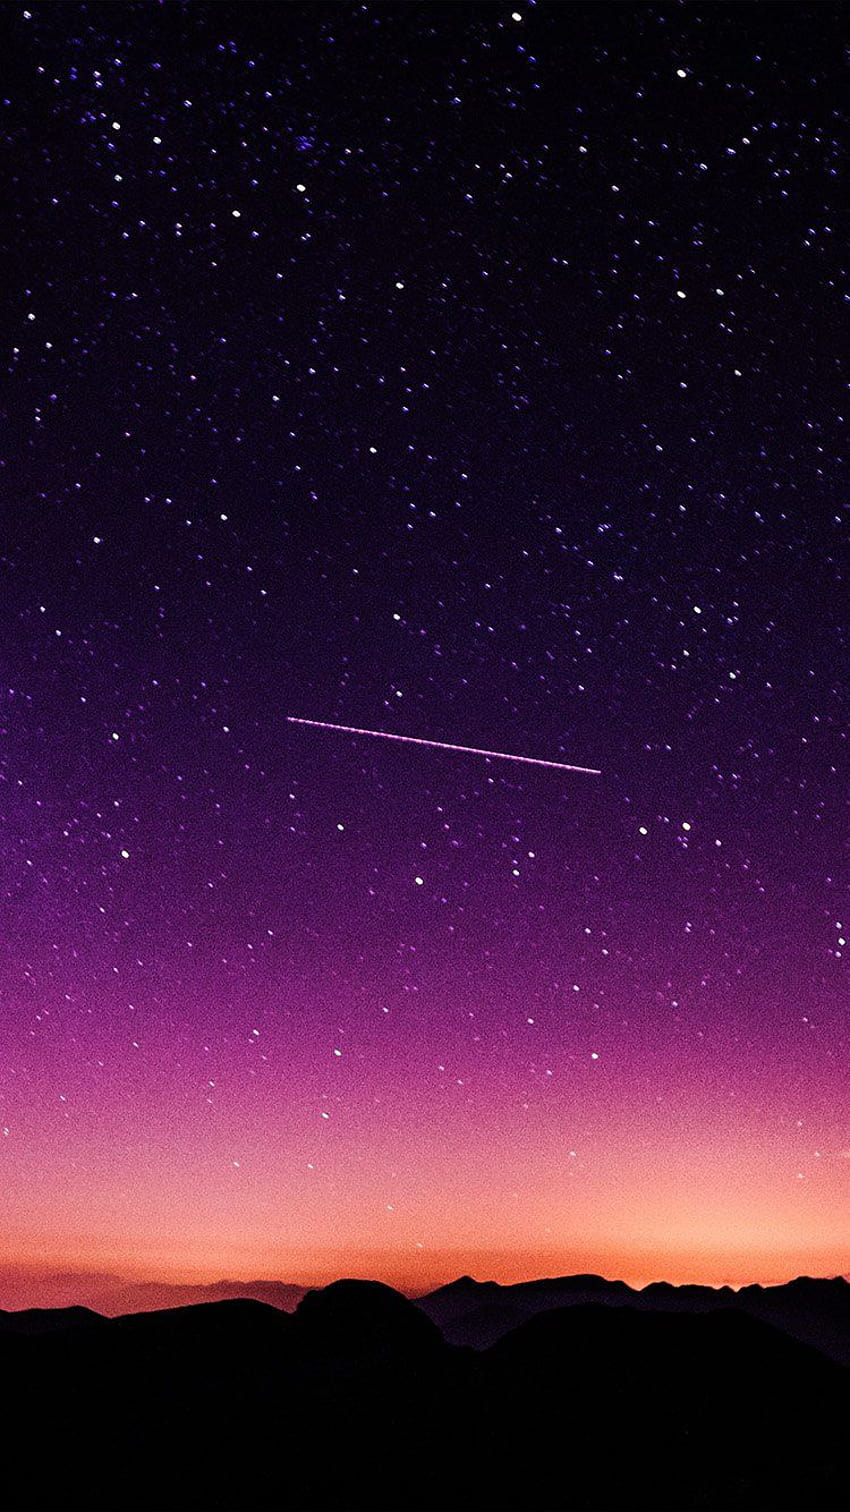 100+] Aesthetic Night Sky Wallpapers | Wallpapers.com